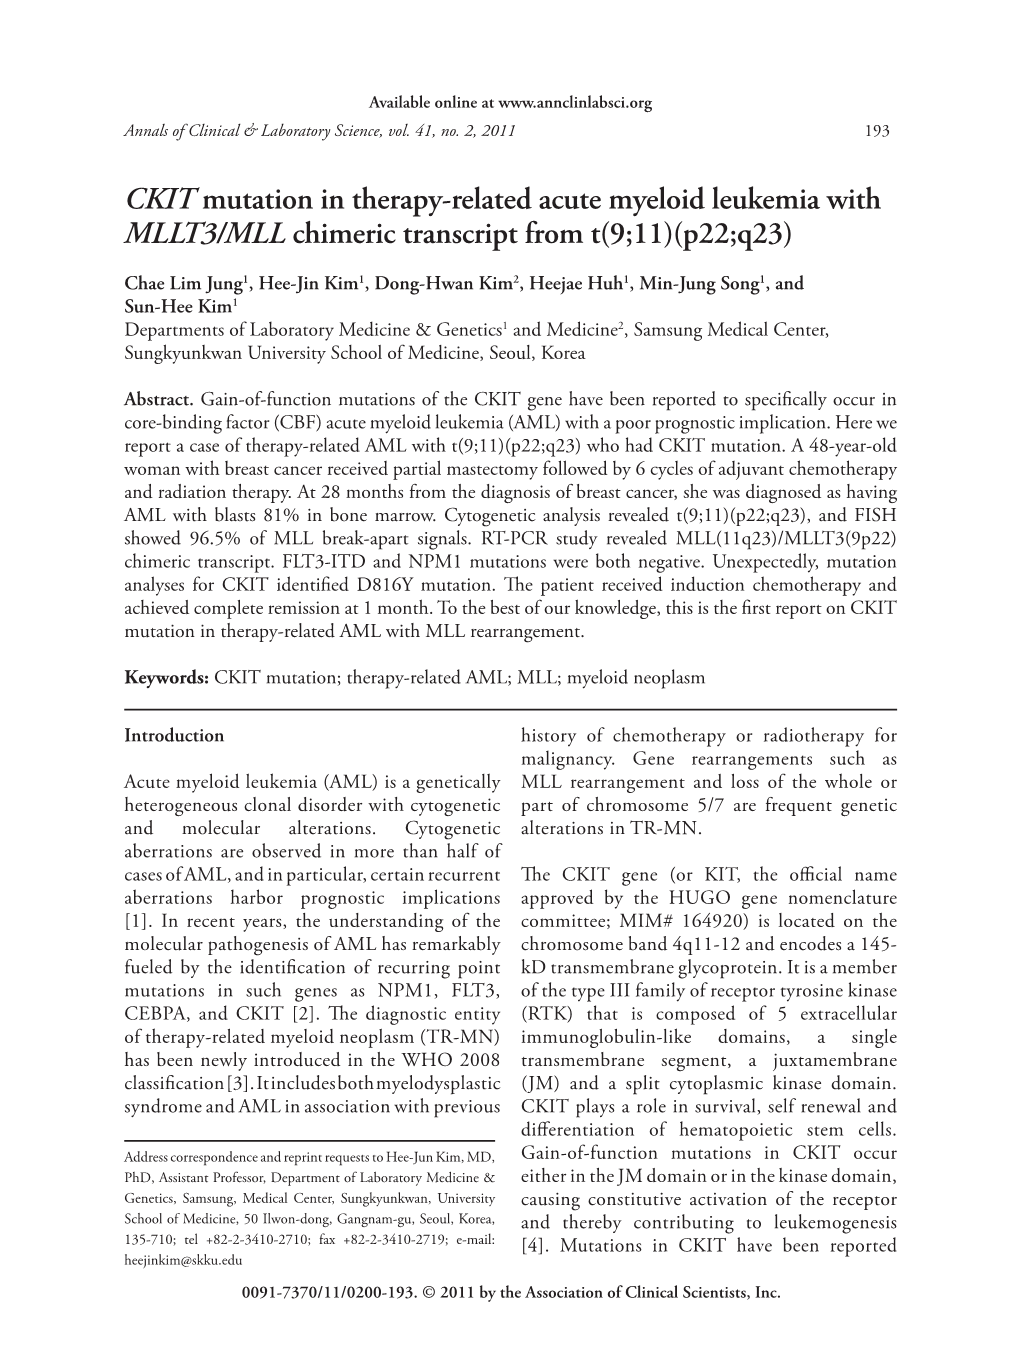 CKIT Mutation in Therapy-Related Acute Myeloid Leukemia with MLLT3/MLL Chimeric Transcript from T(9;11)(P22;Q23)